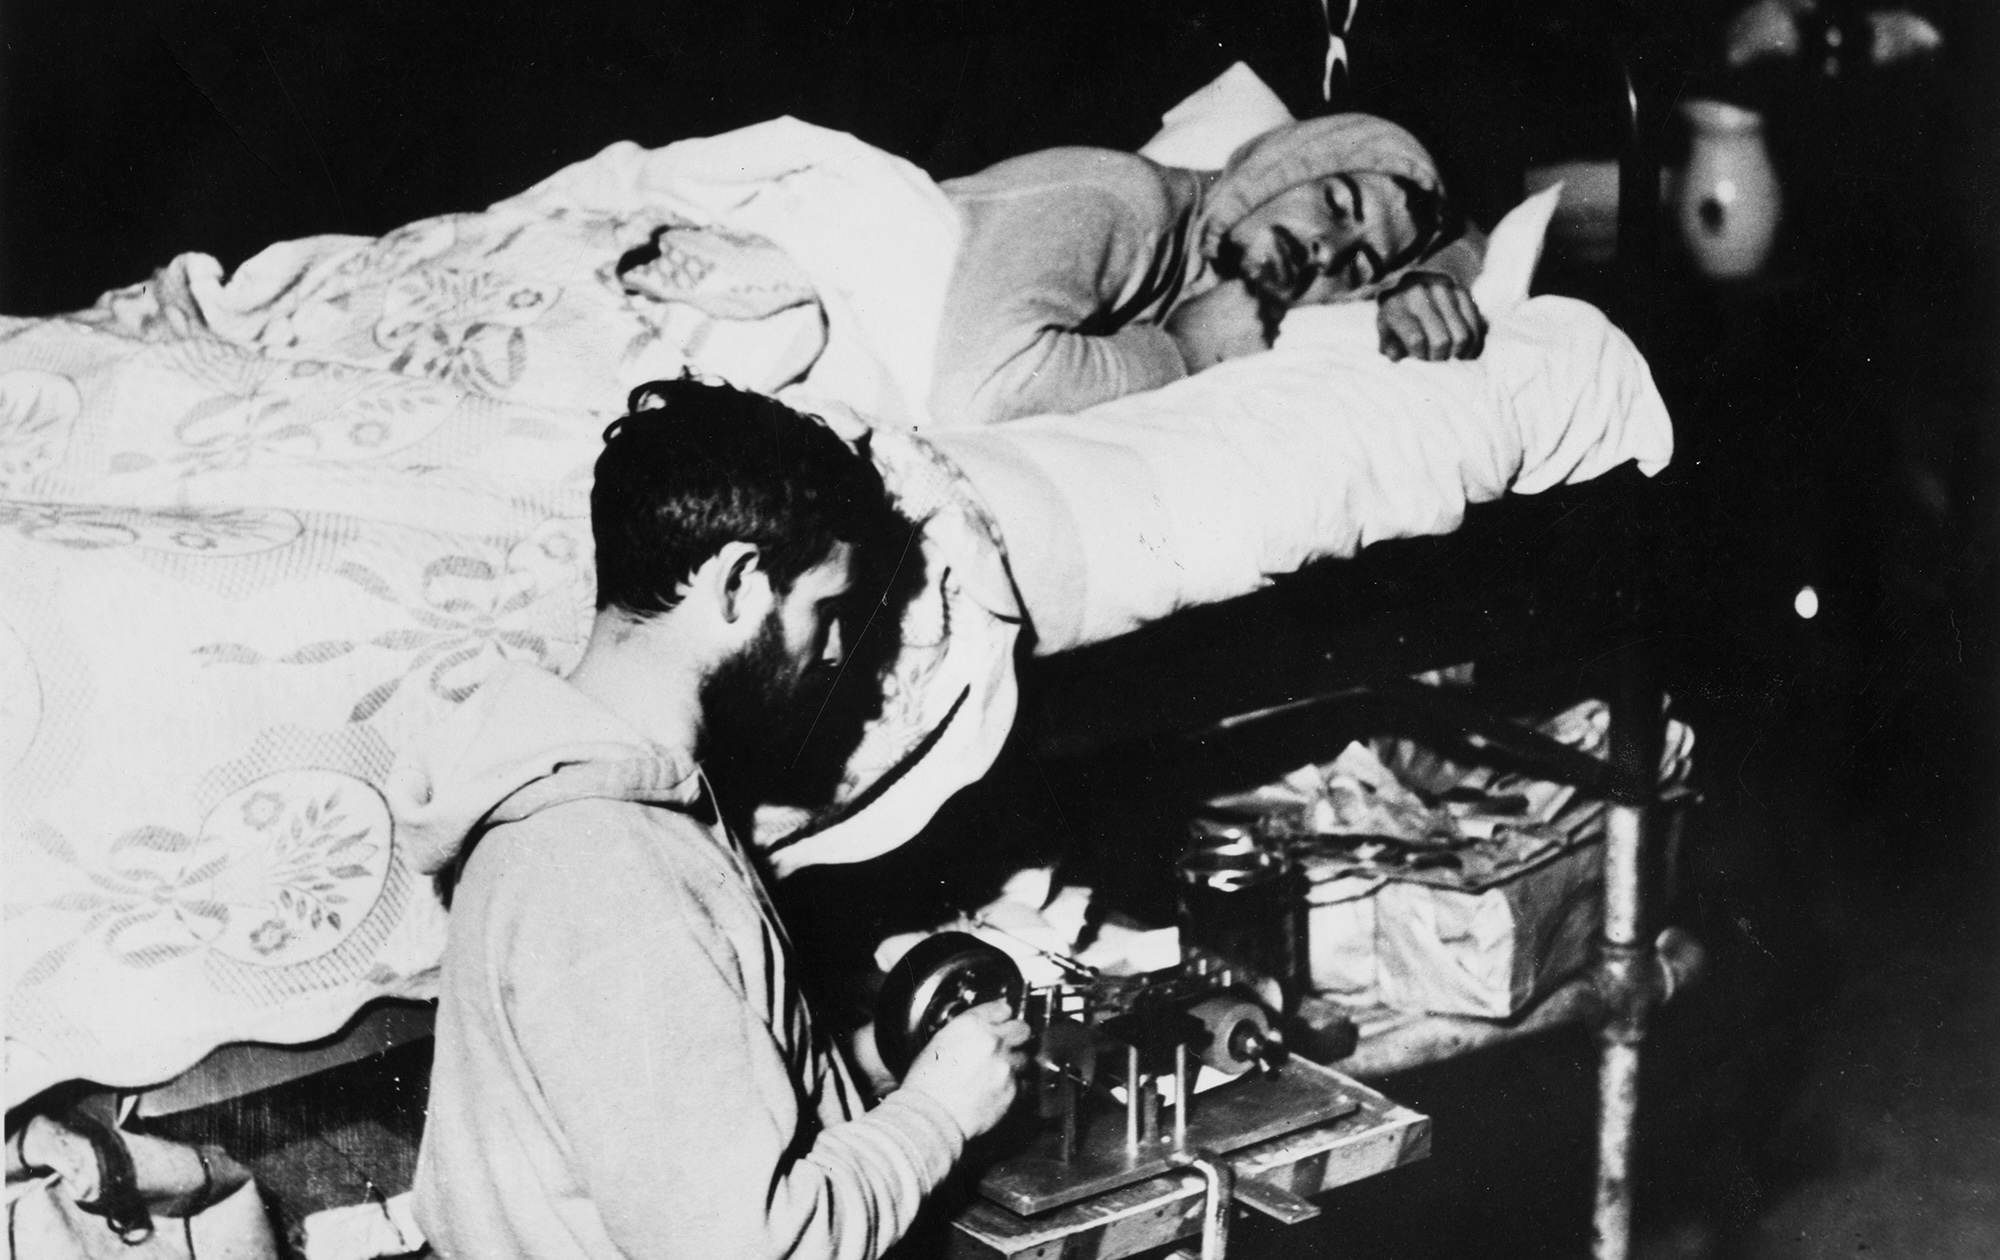 Sleep researcher Nathaniel Kleitman, PhD 1923, and a research assistant in Kentucky’s Mammoth Cave